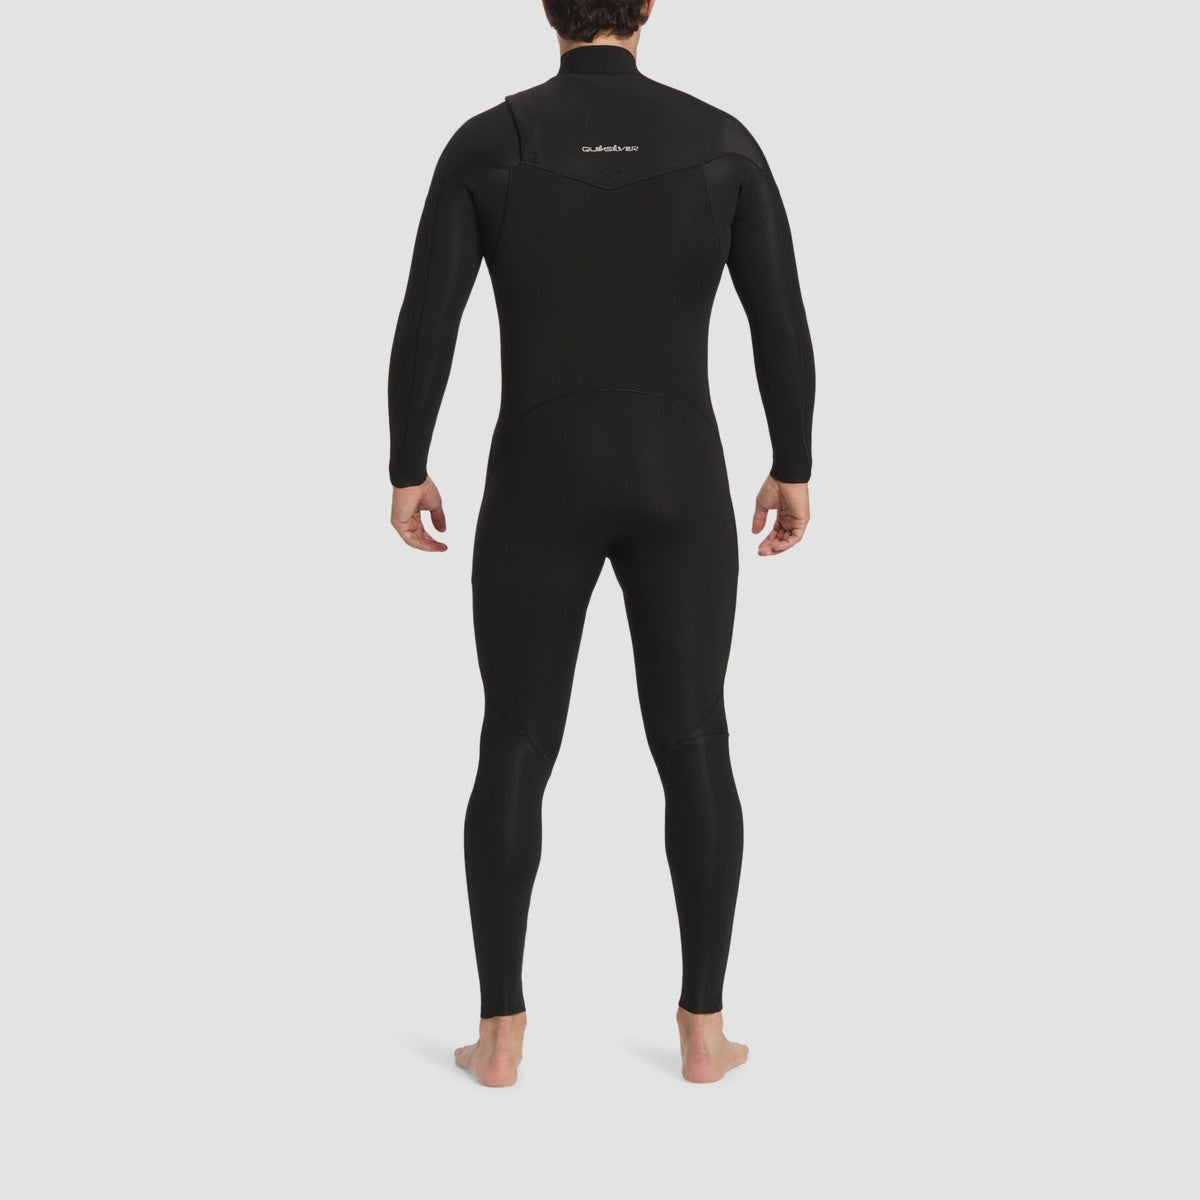 Quiksilver Everyday Sessions 4/3mm Chest Zip Wetsuit Black